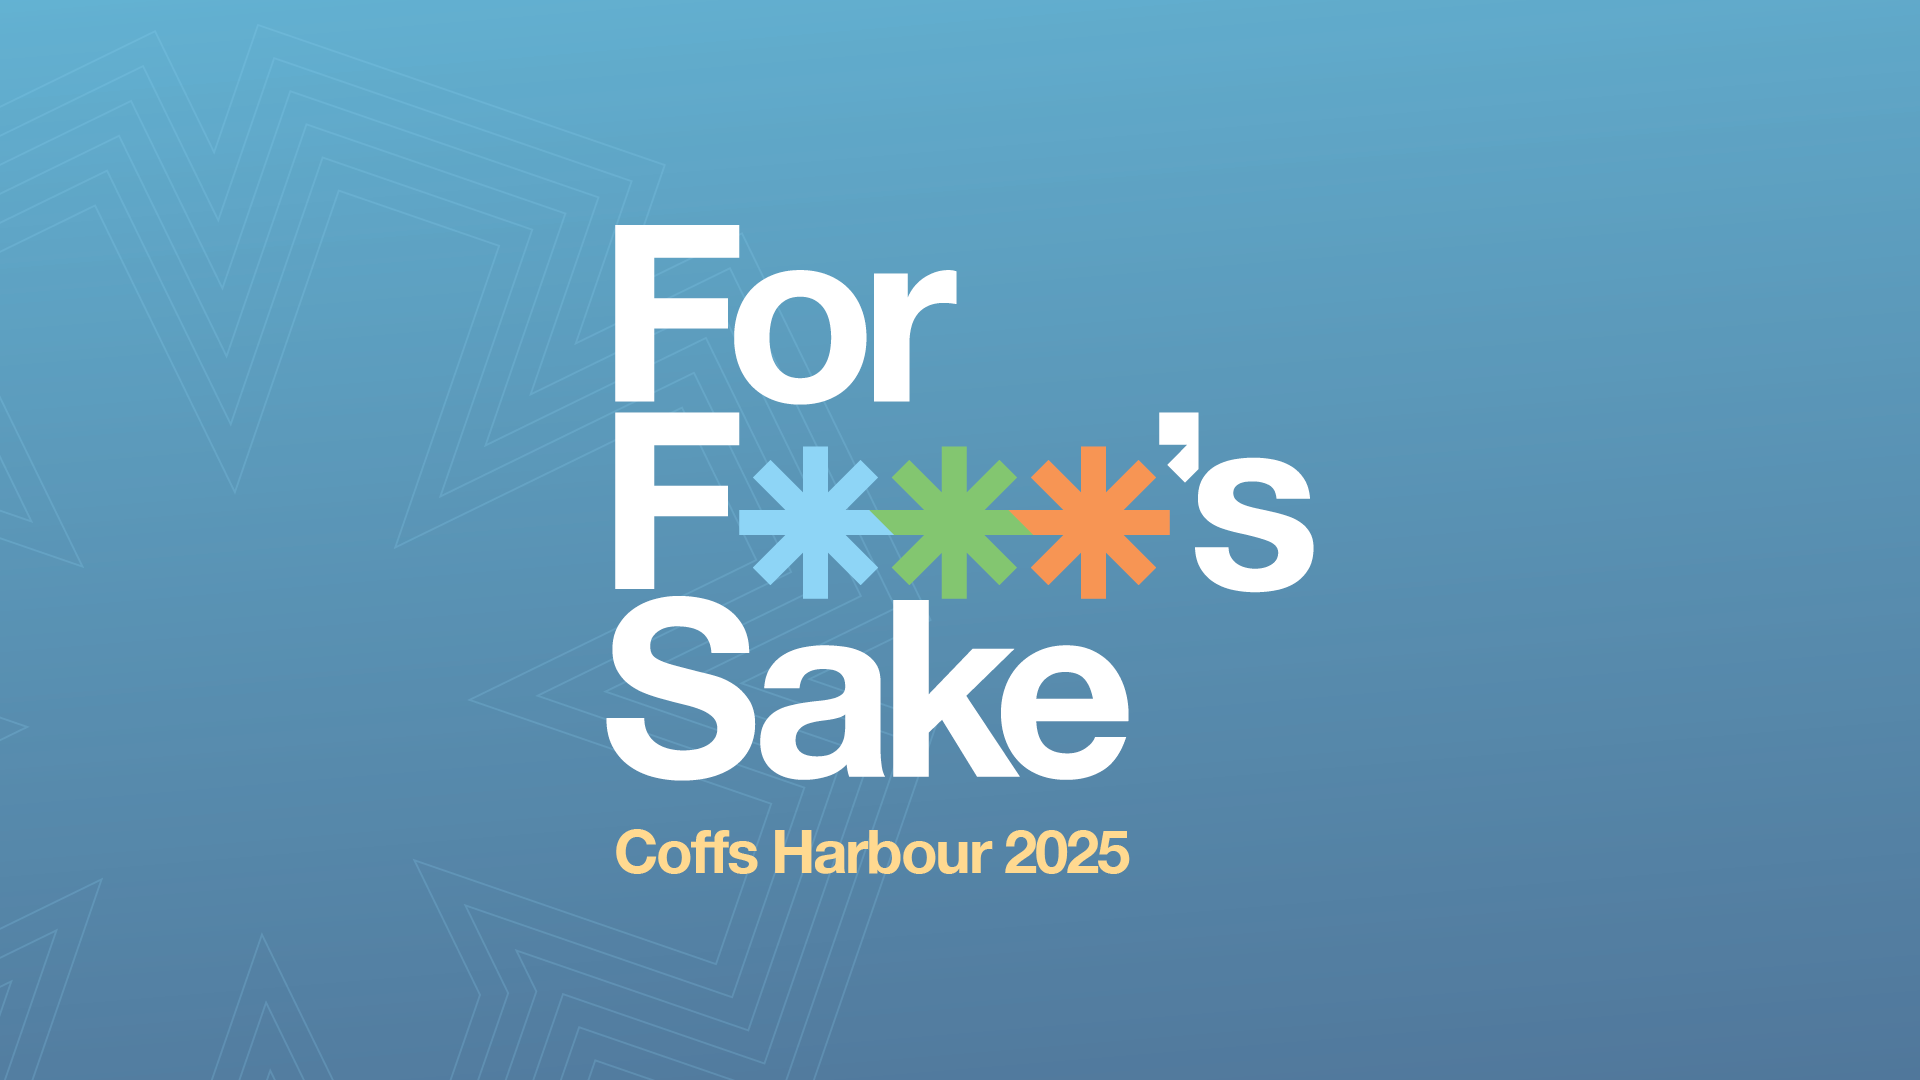 Register your interest to our next For Food's Sake Summit in Coffs Harbour for updates on speakers, programs, session and tours.